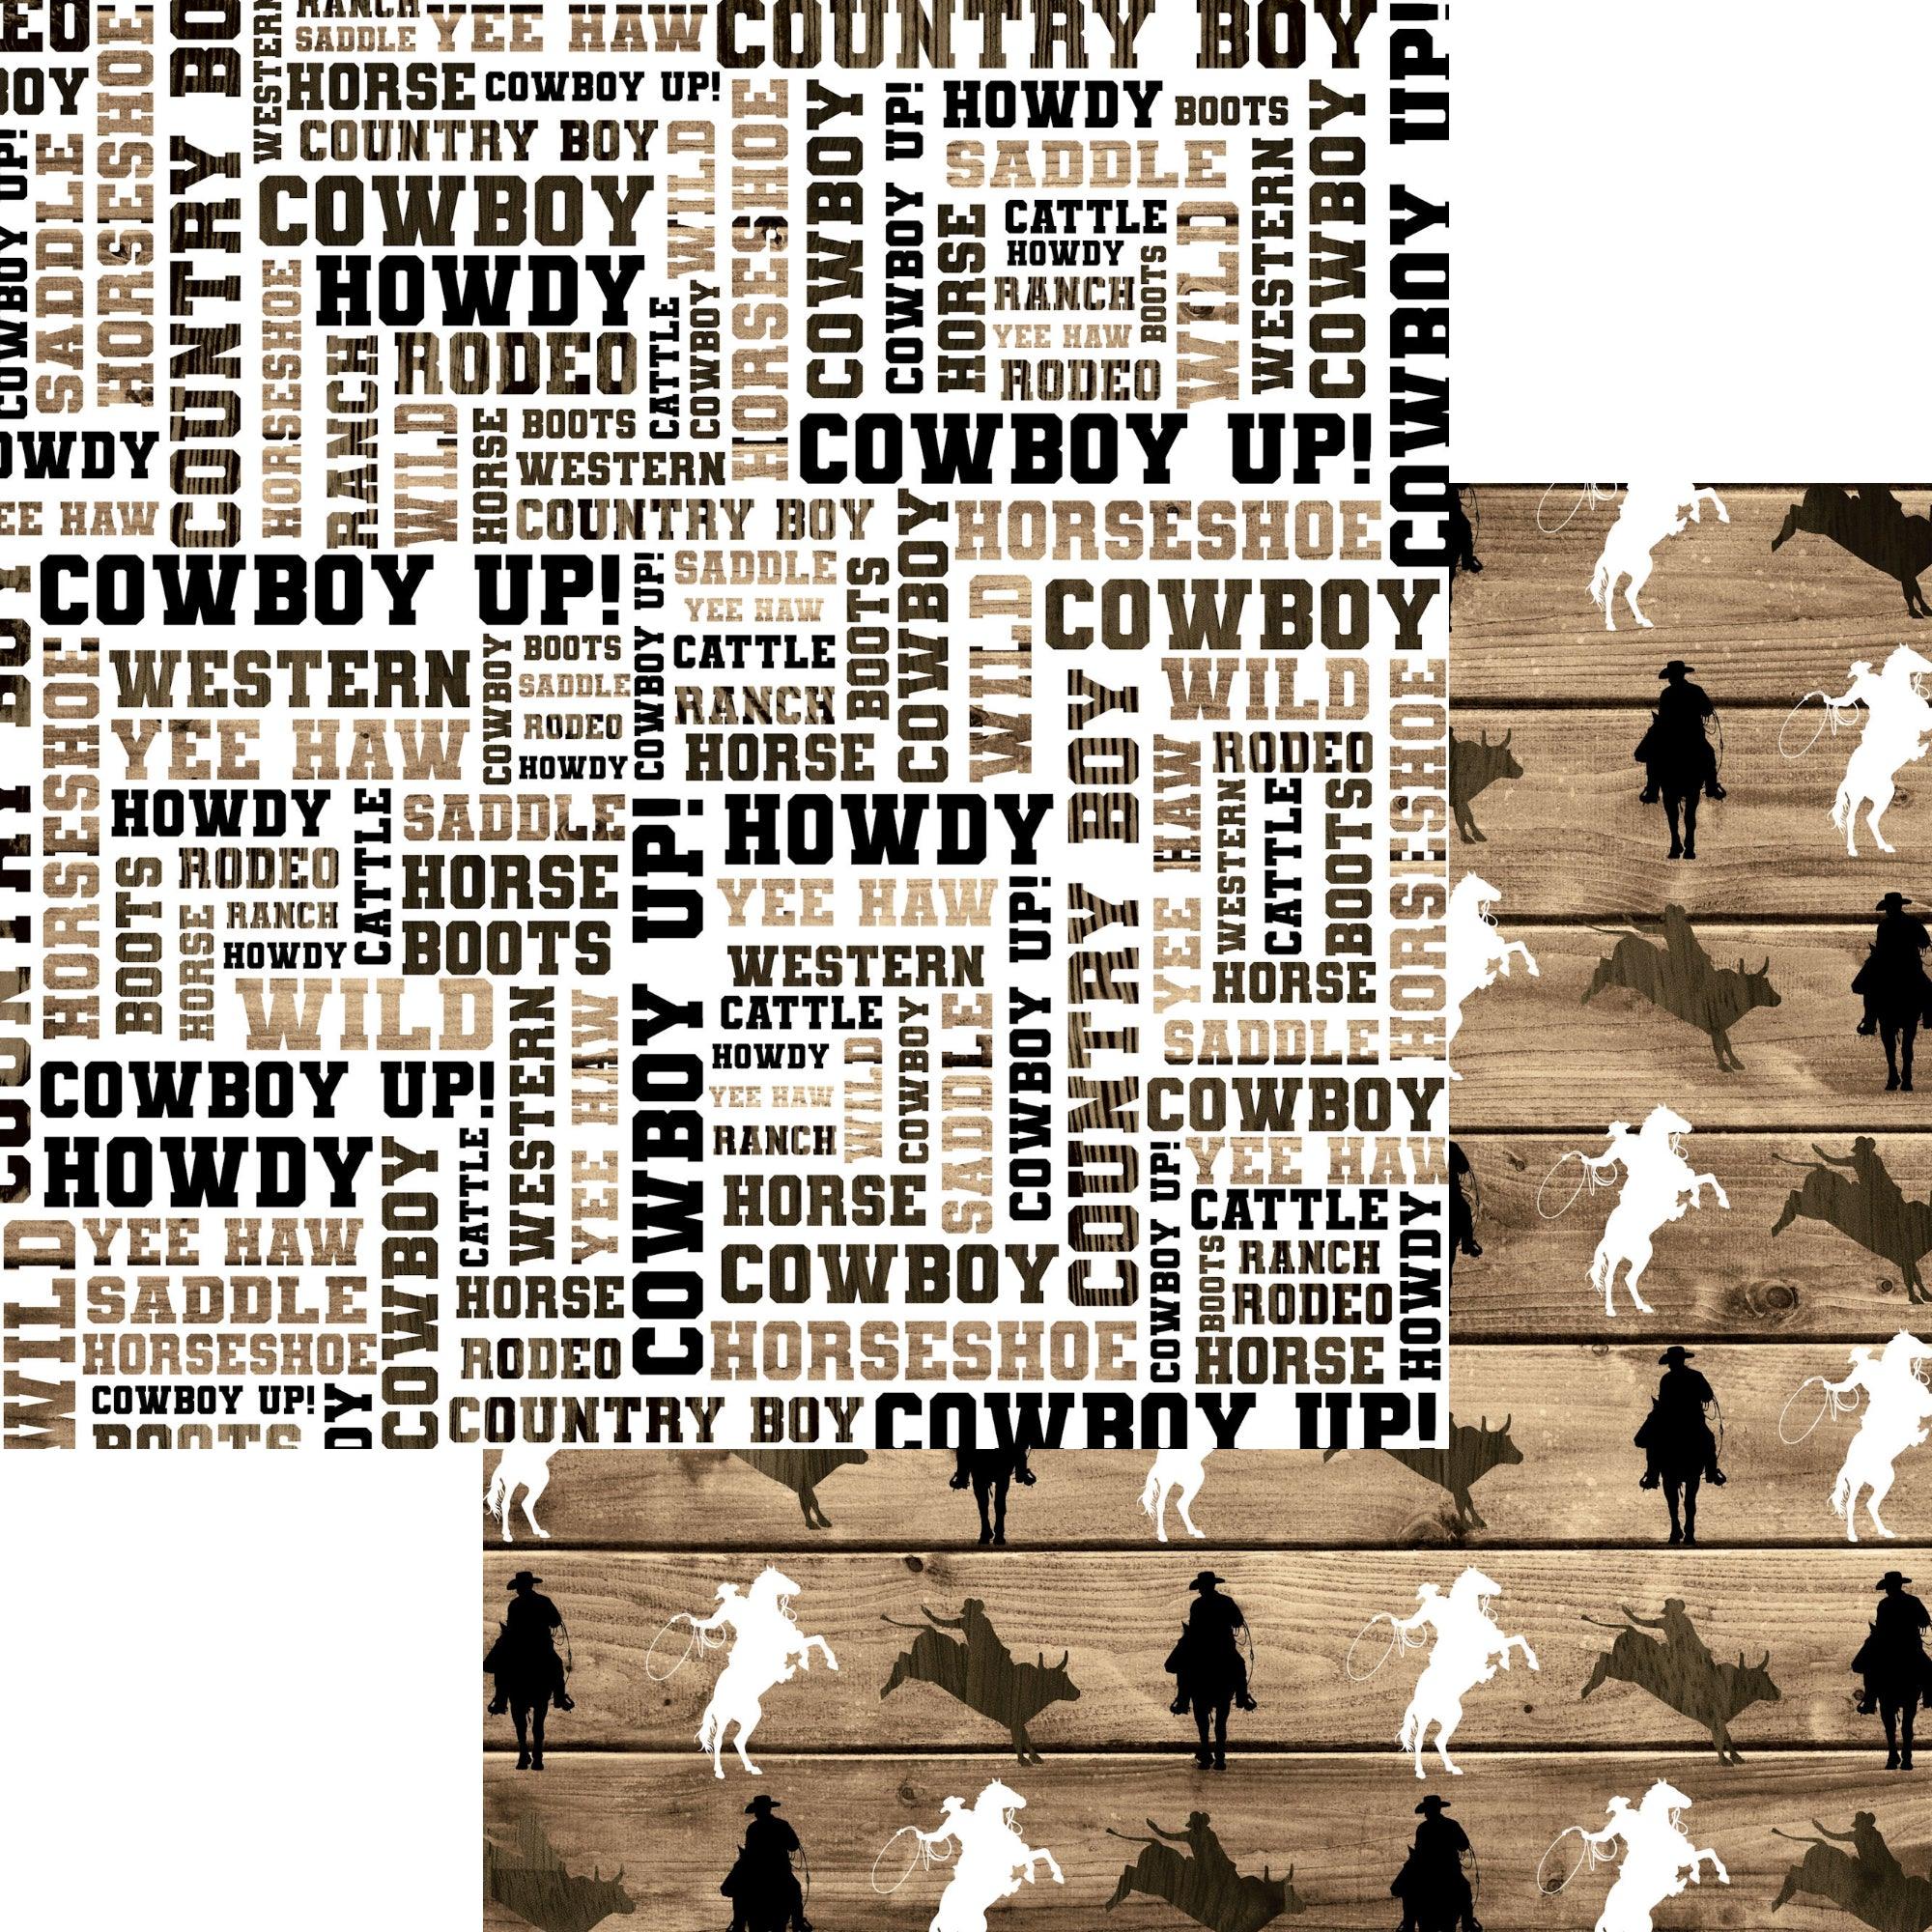 Cowboys Collection Cowboy Up 12 x 12 Double-Sided Scrapbook Paper by SSC Designs